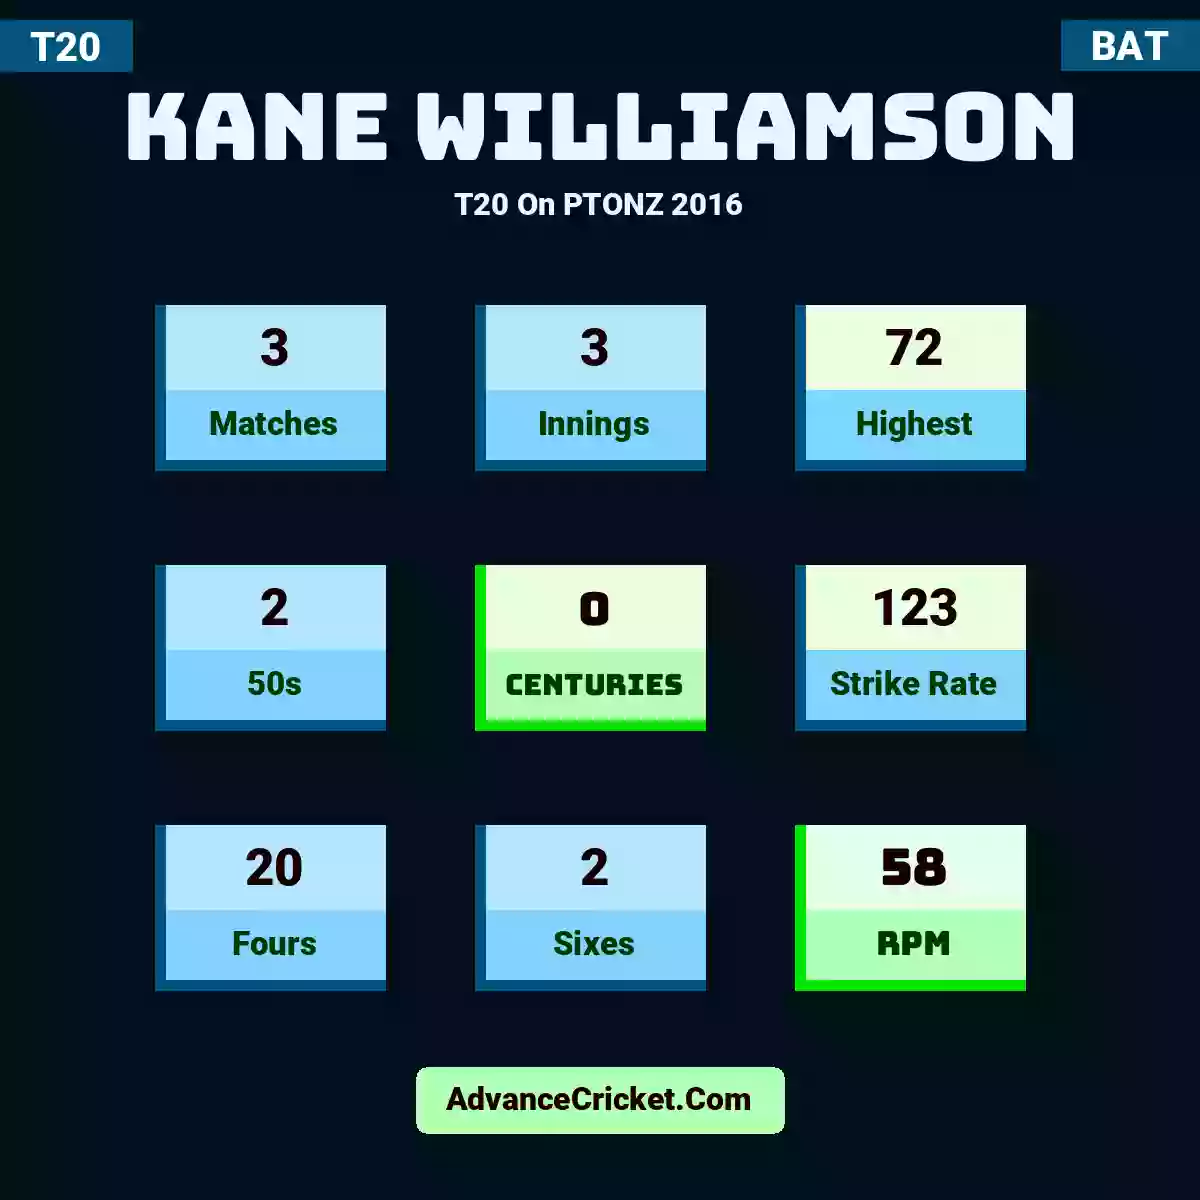 Kane Williamson T20  On PTONZ 2016, Kane Williamson played 3 matches, scored 72 runs as highest, 2 half-centuries, and 0 centuries, with a strike rate of 123. K.Williamson hit 20 fours and 2 sixes, with an RPM of 58.